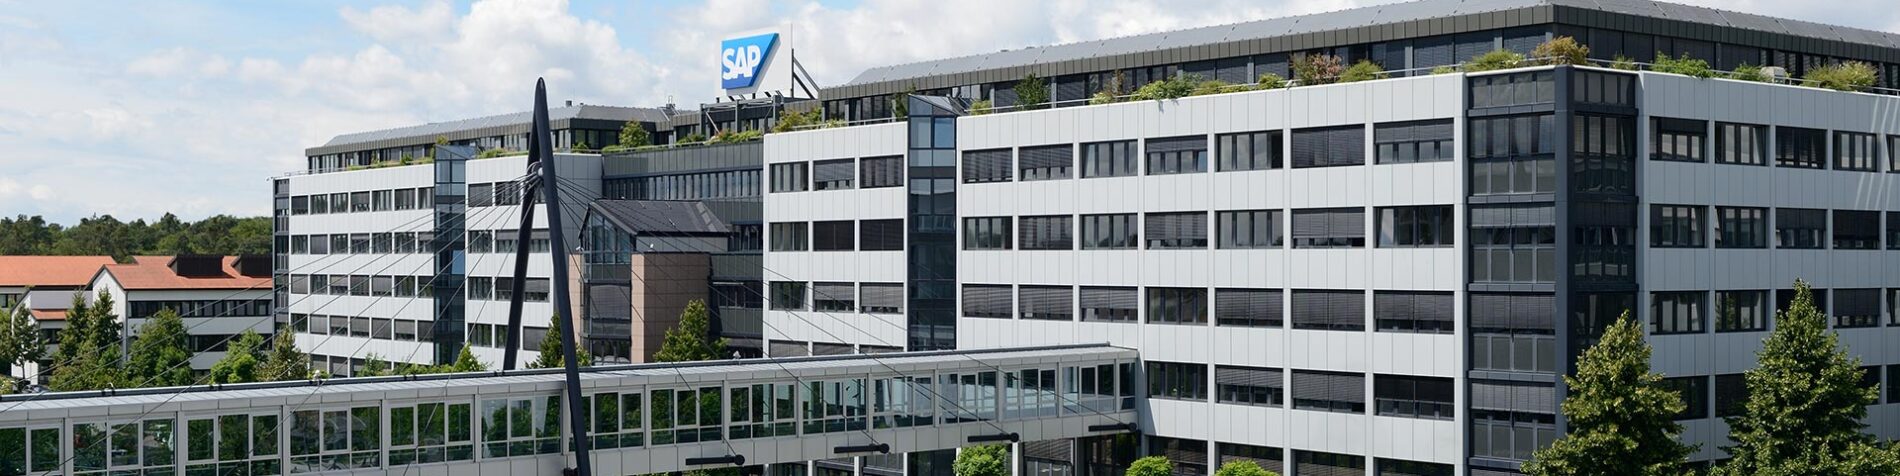 SAP to Release Second Quarter 2021 Results